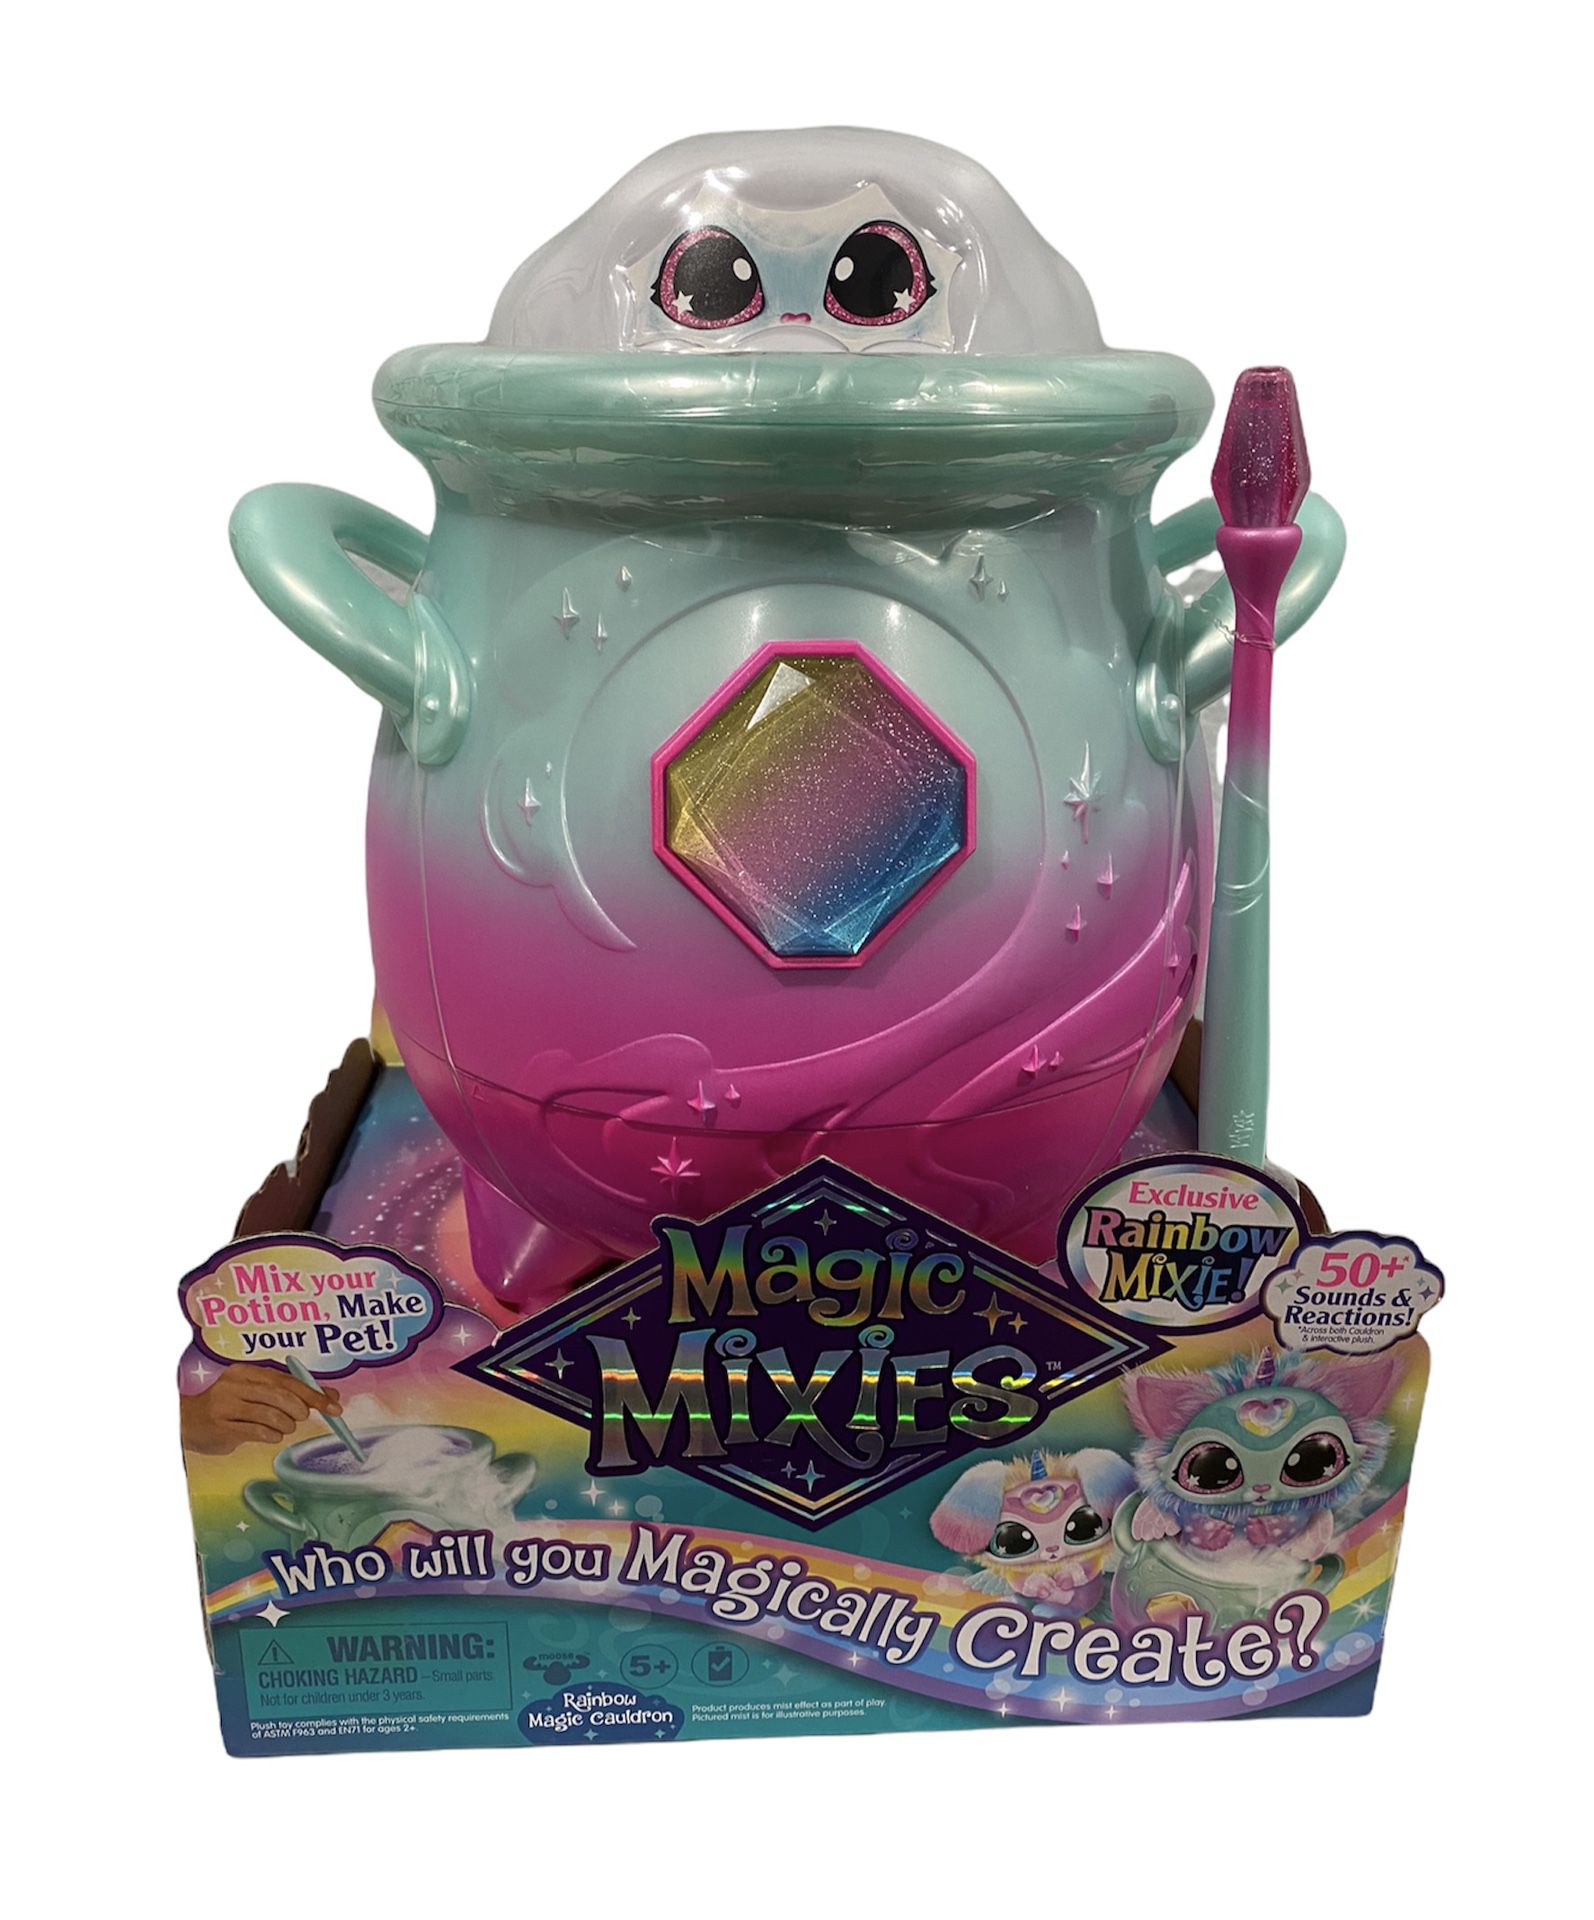 ✅IN HAND✅ NEW Magic Mixies Magical Mixing Cauldron -EXCLUSIVE